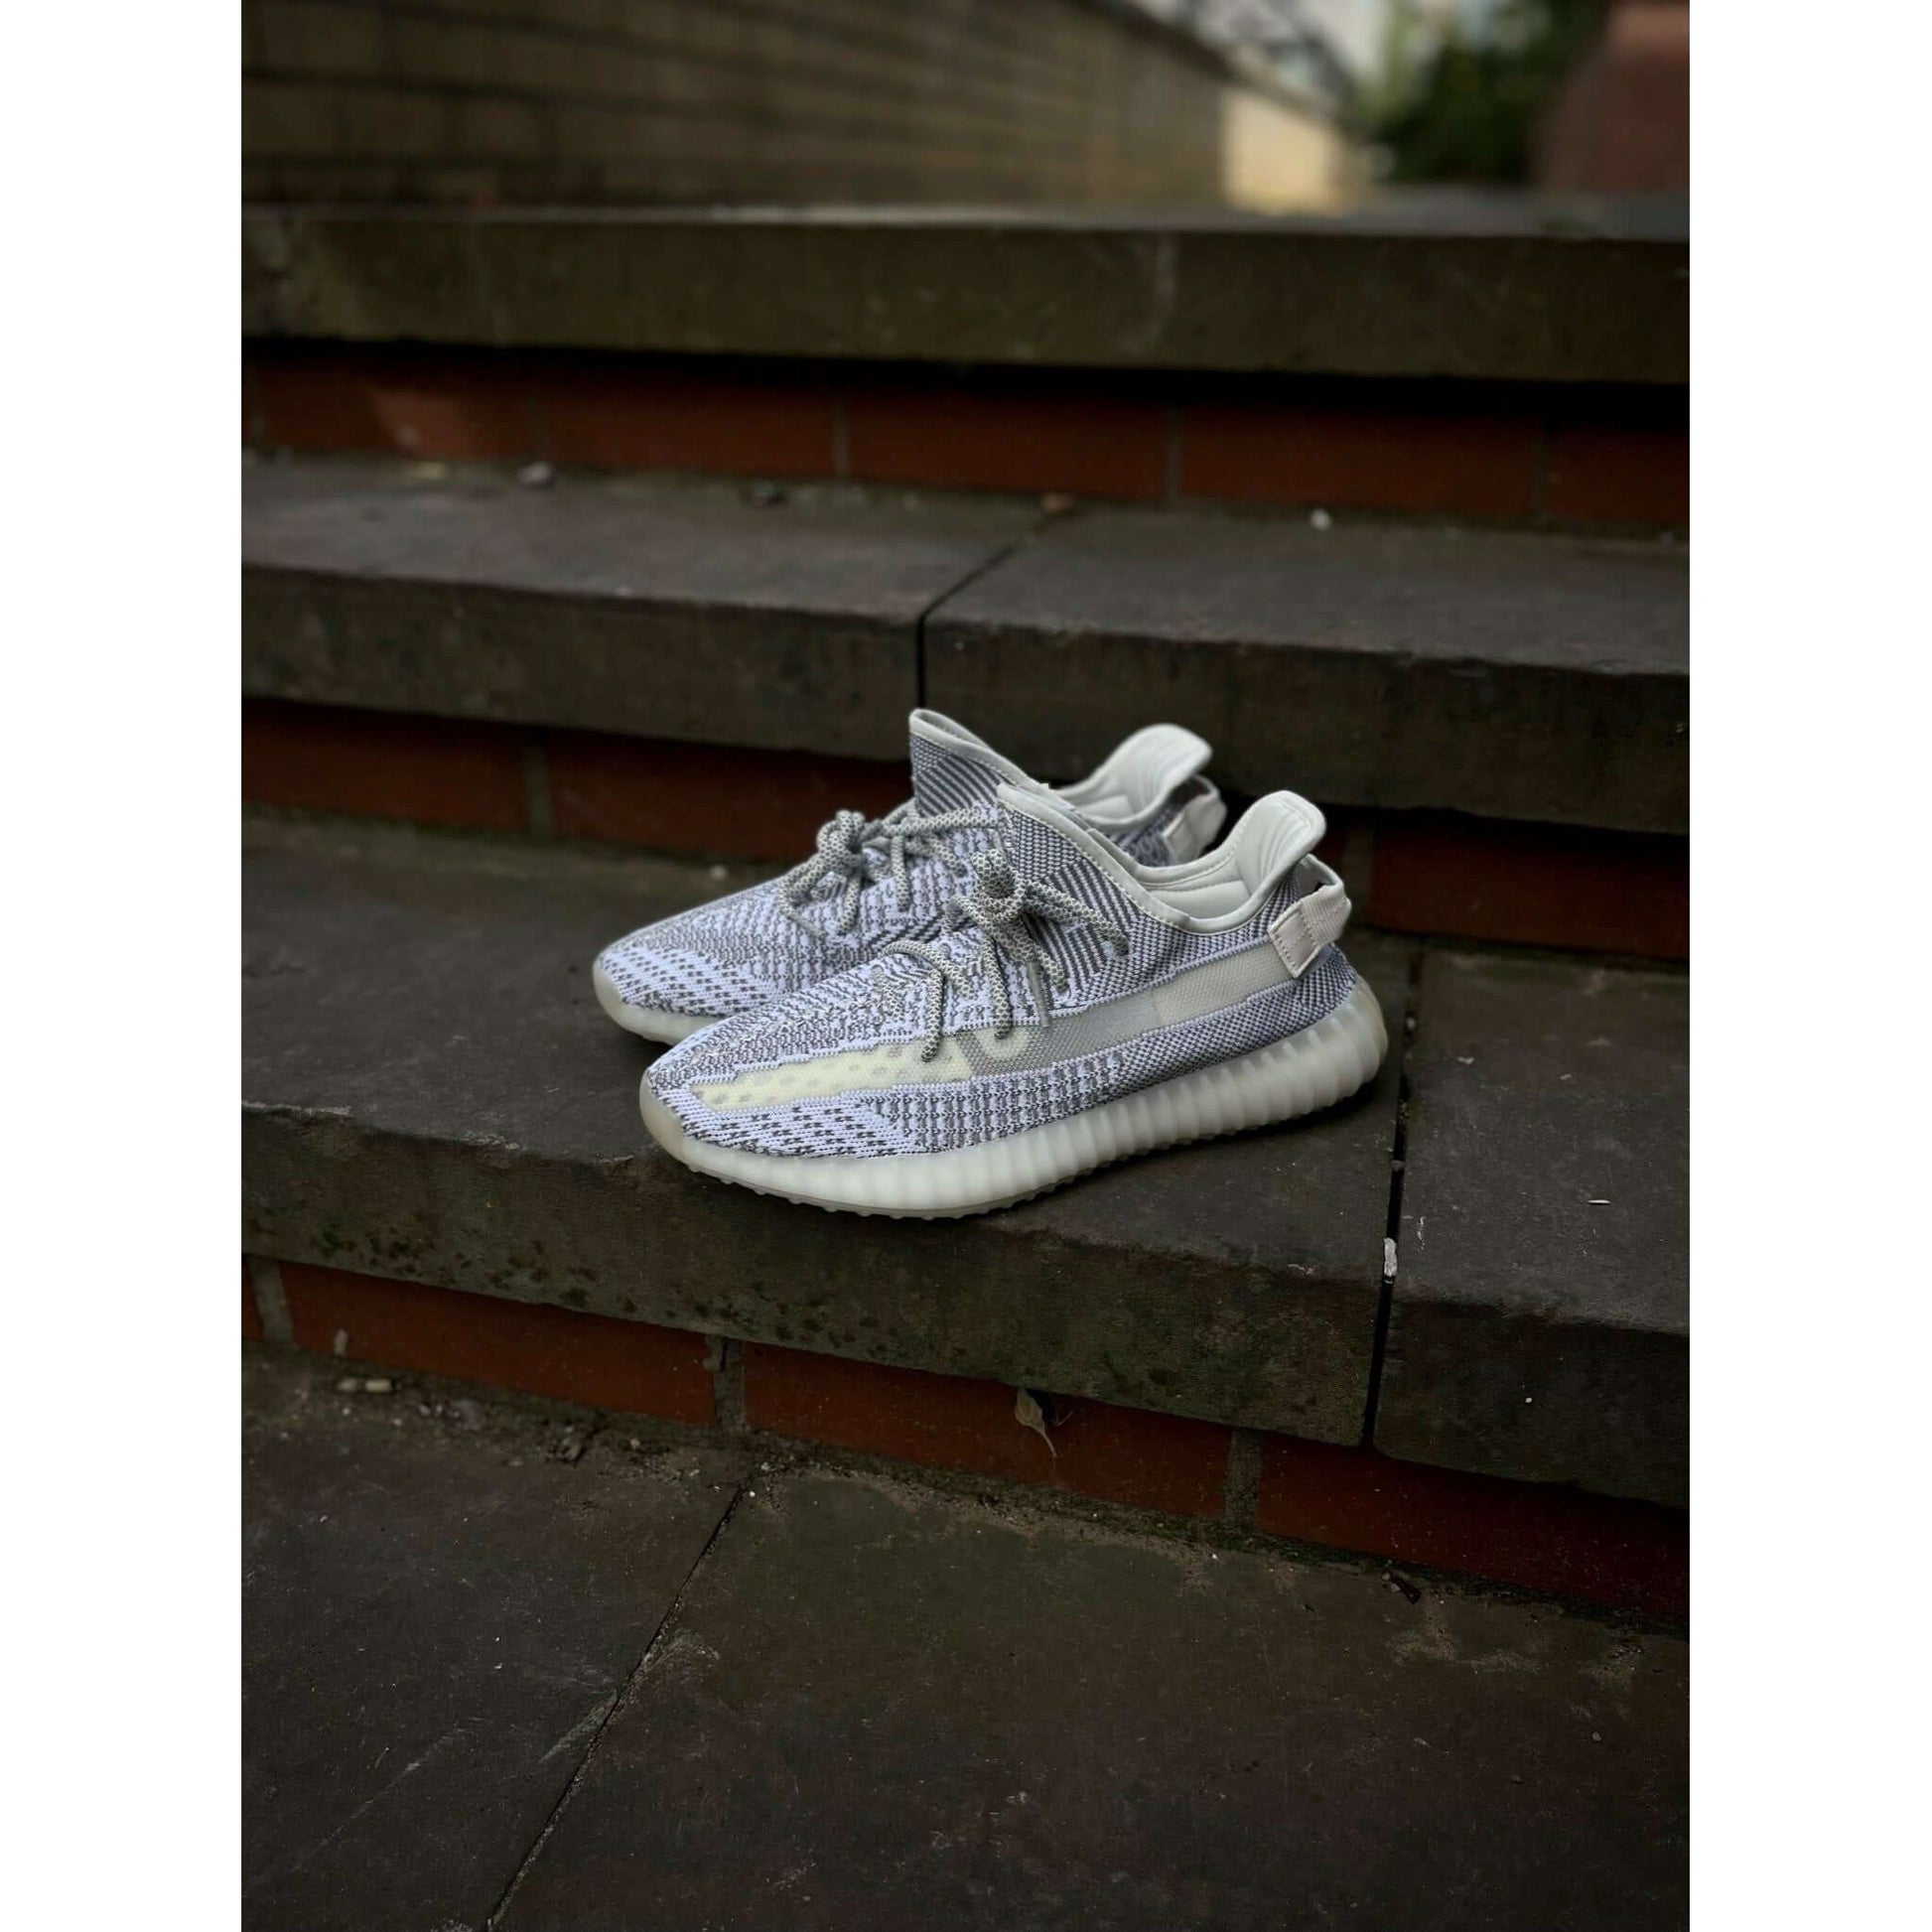 Adidas Yeezy Boost 350 V2 Static from Yeezy